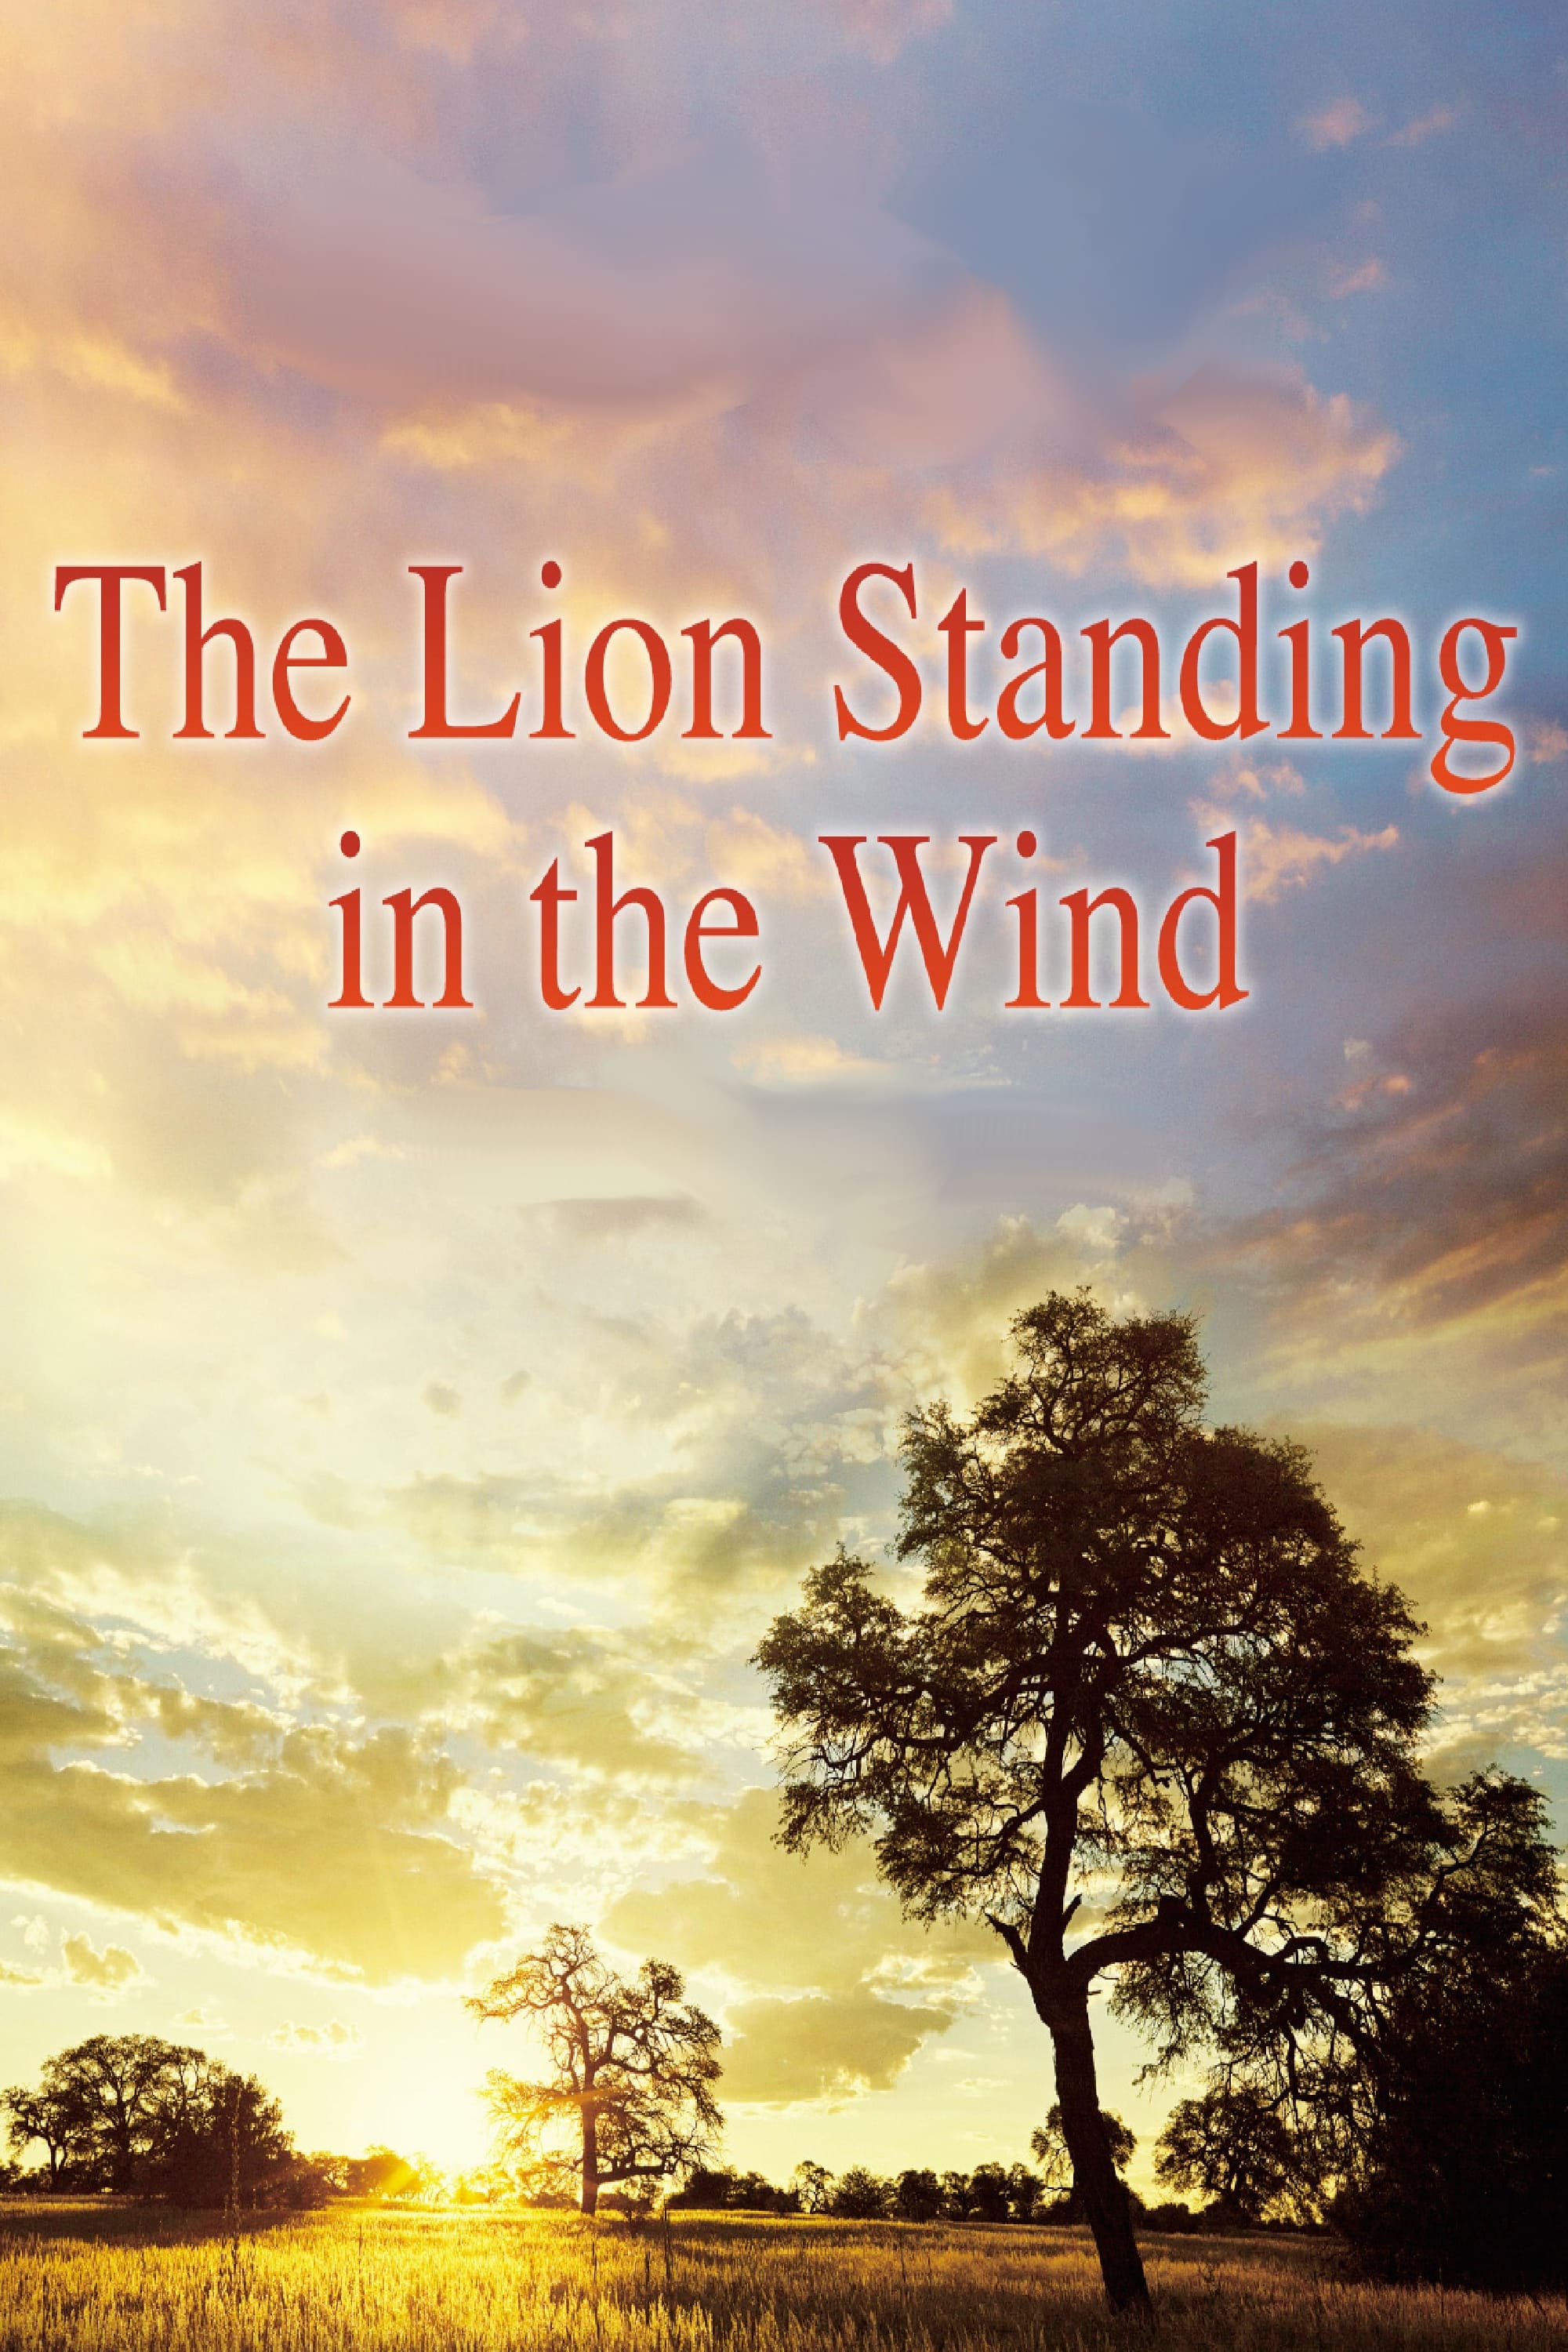 The Lion Standing in the Wind (2015)